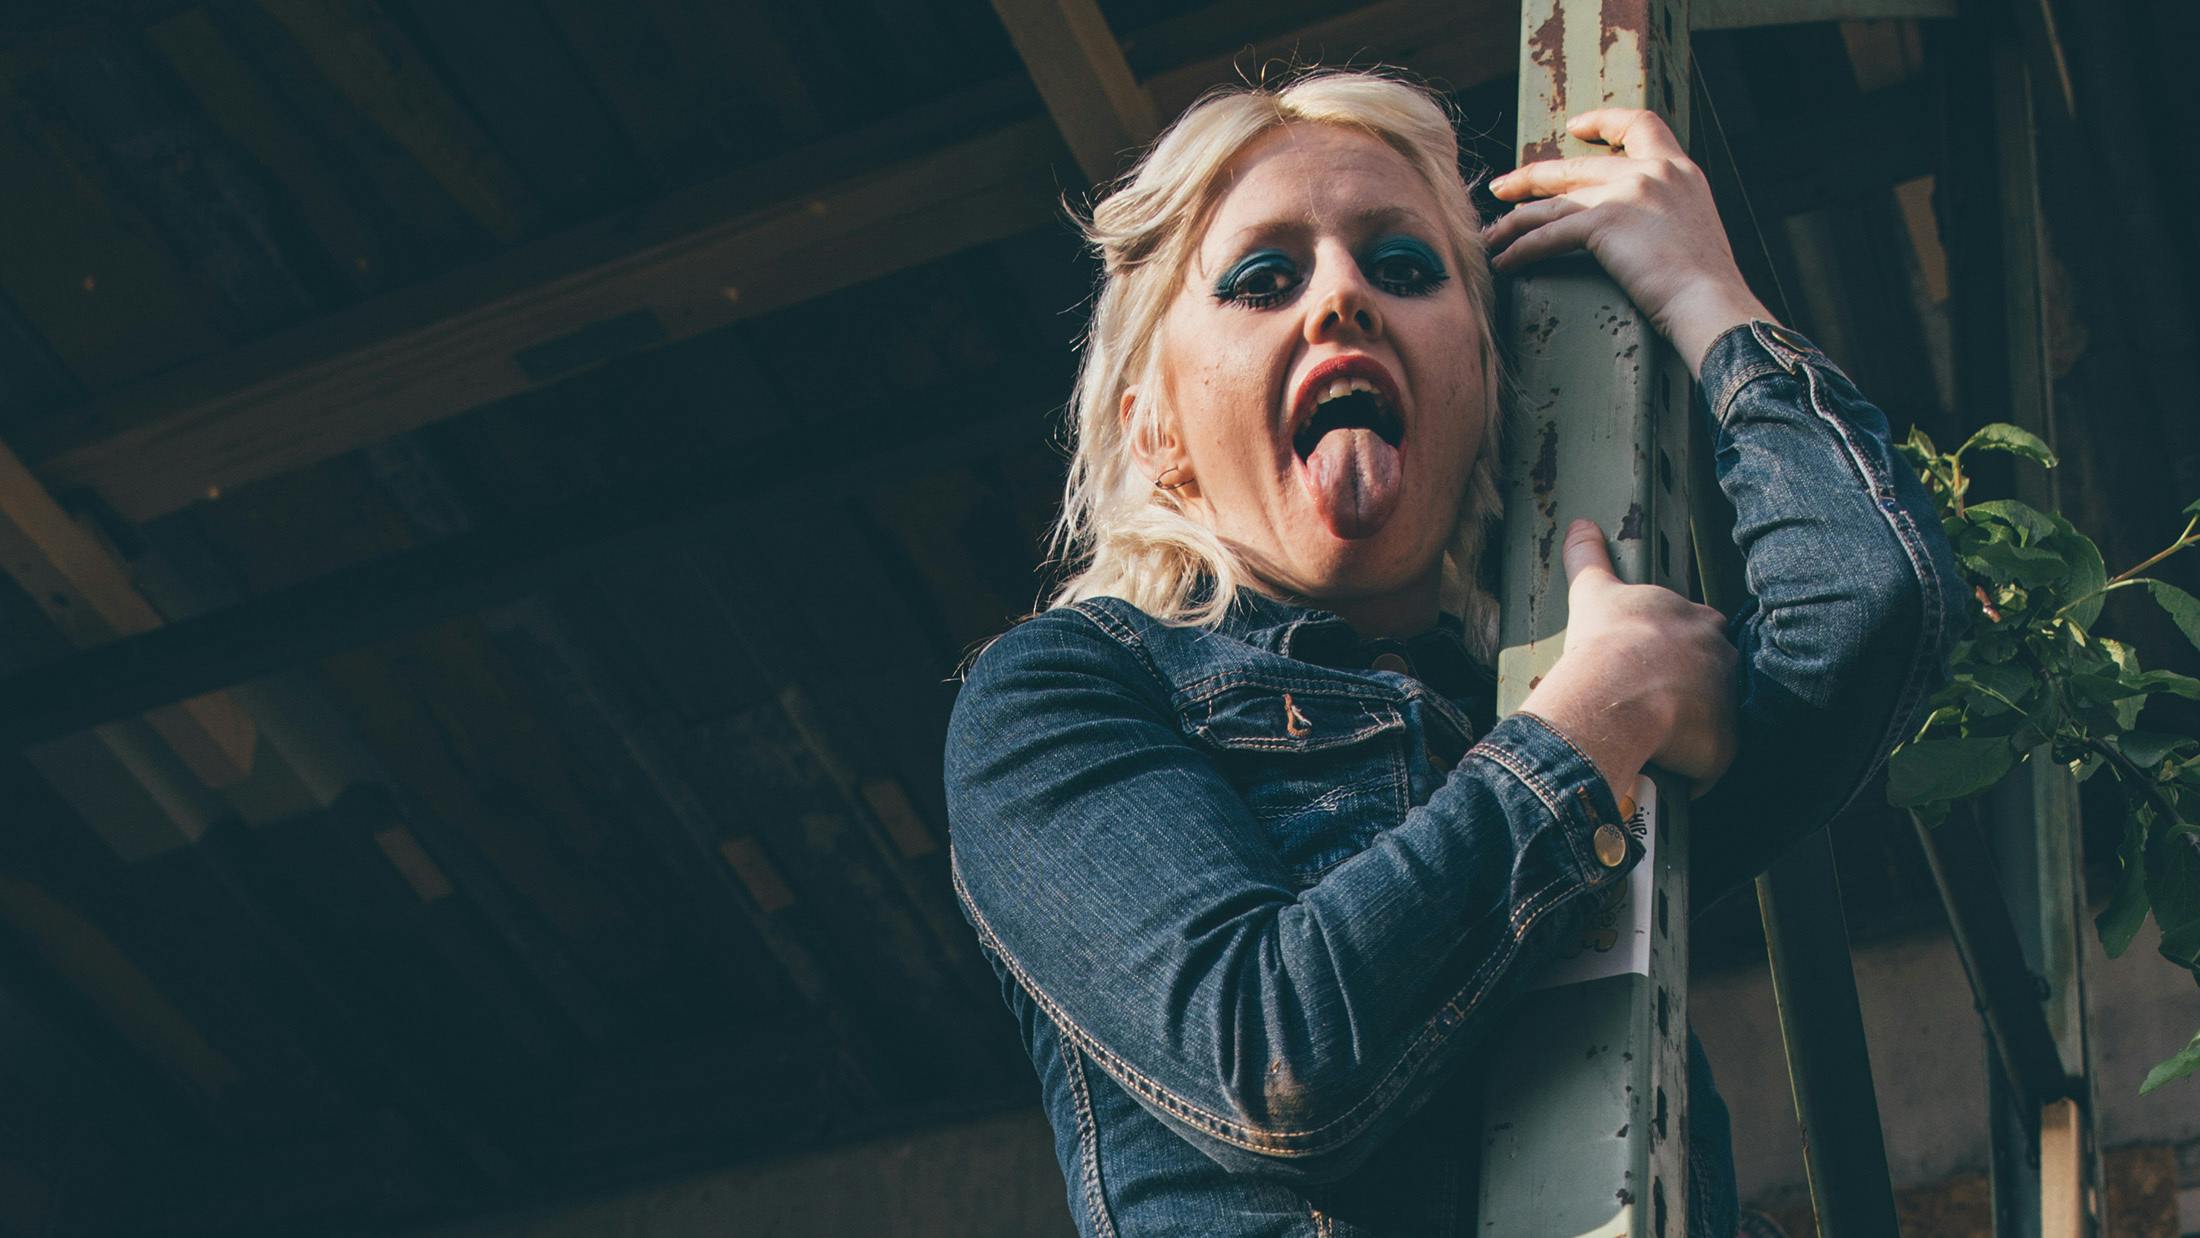 Amyl And The Sniffers’ Amy Taylor: The 10 songs that changed my life